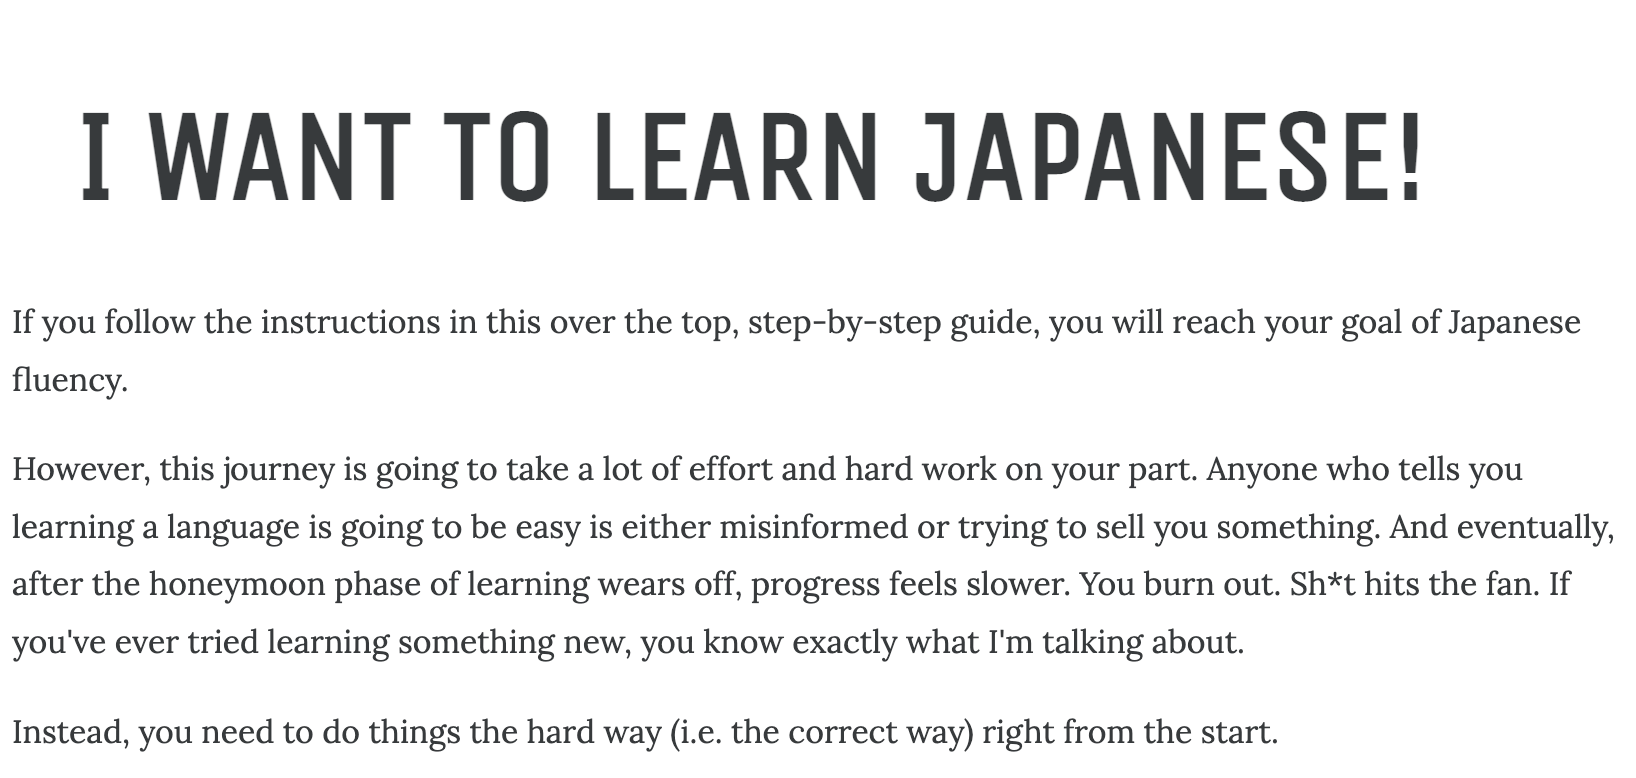 Excerpt of Tofugu's guide to learning Japanese
